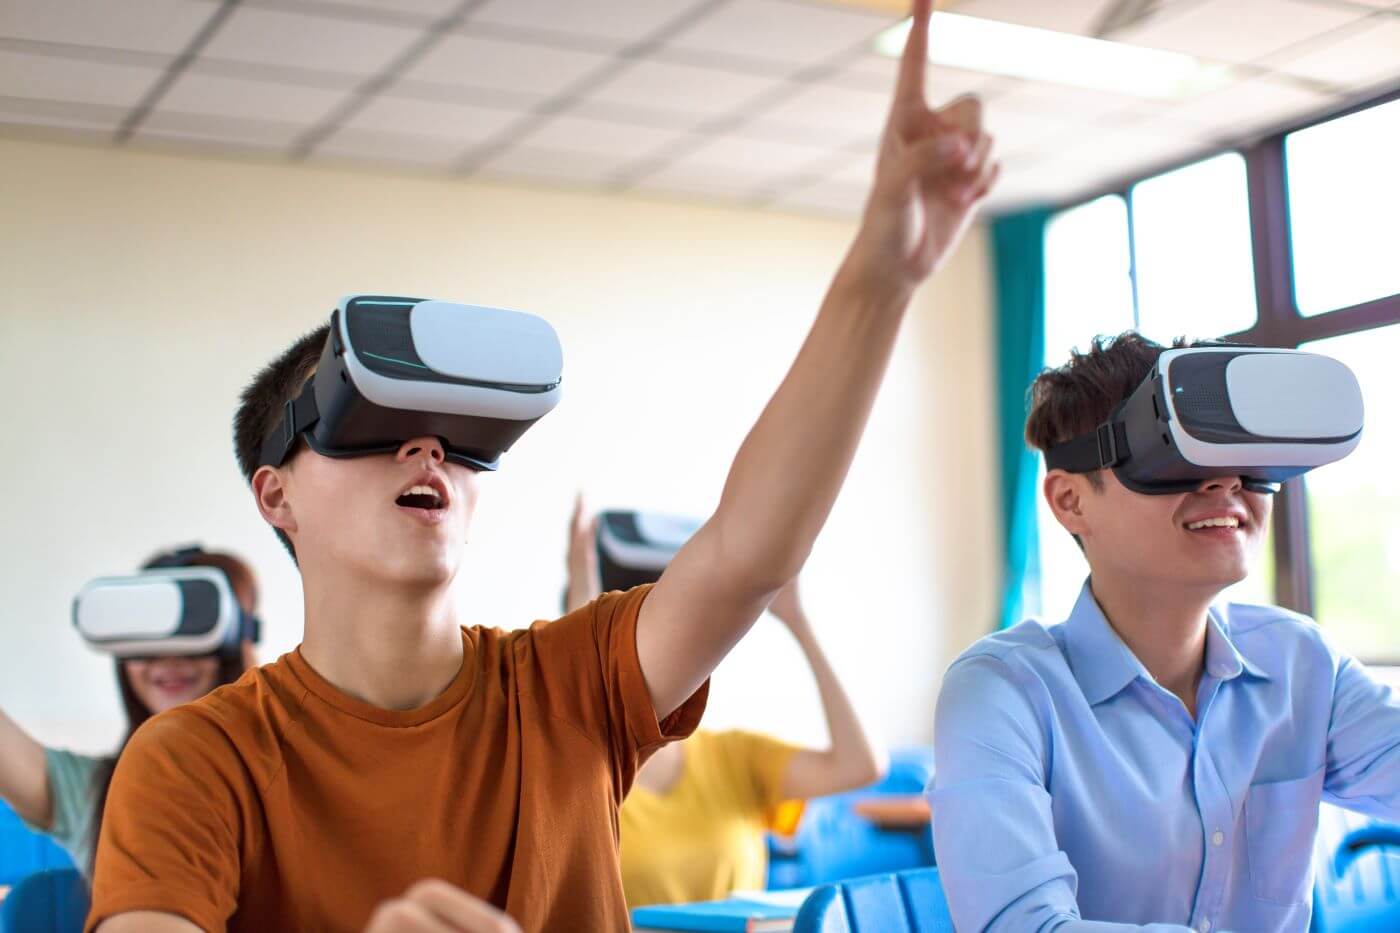 How Will Virtual Reality Change Education?